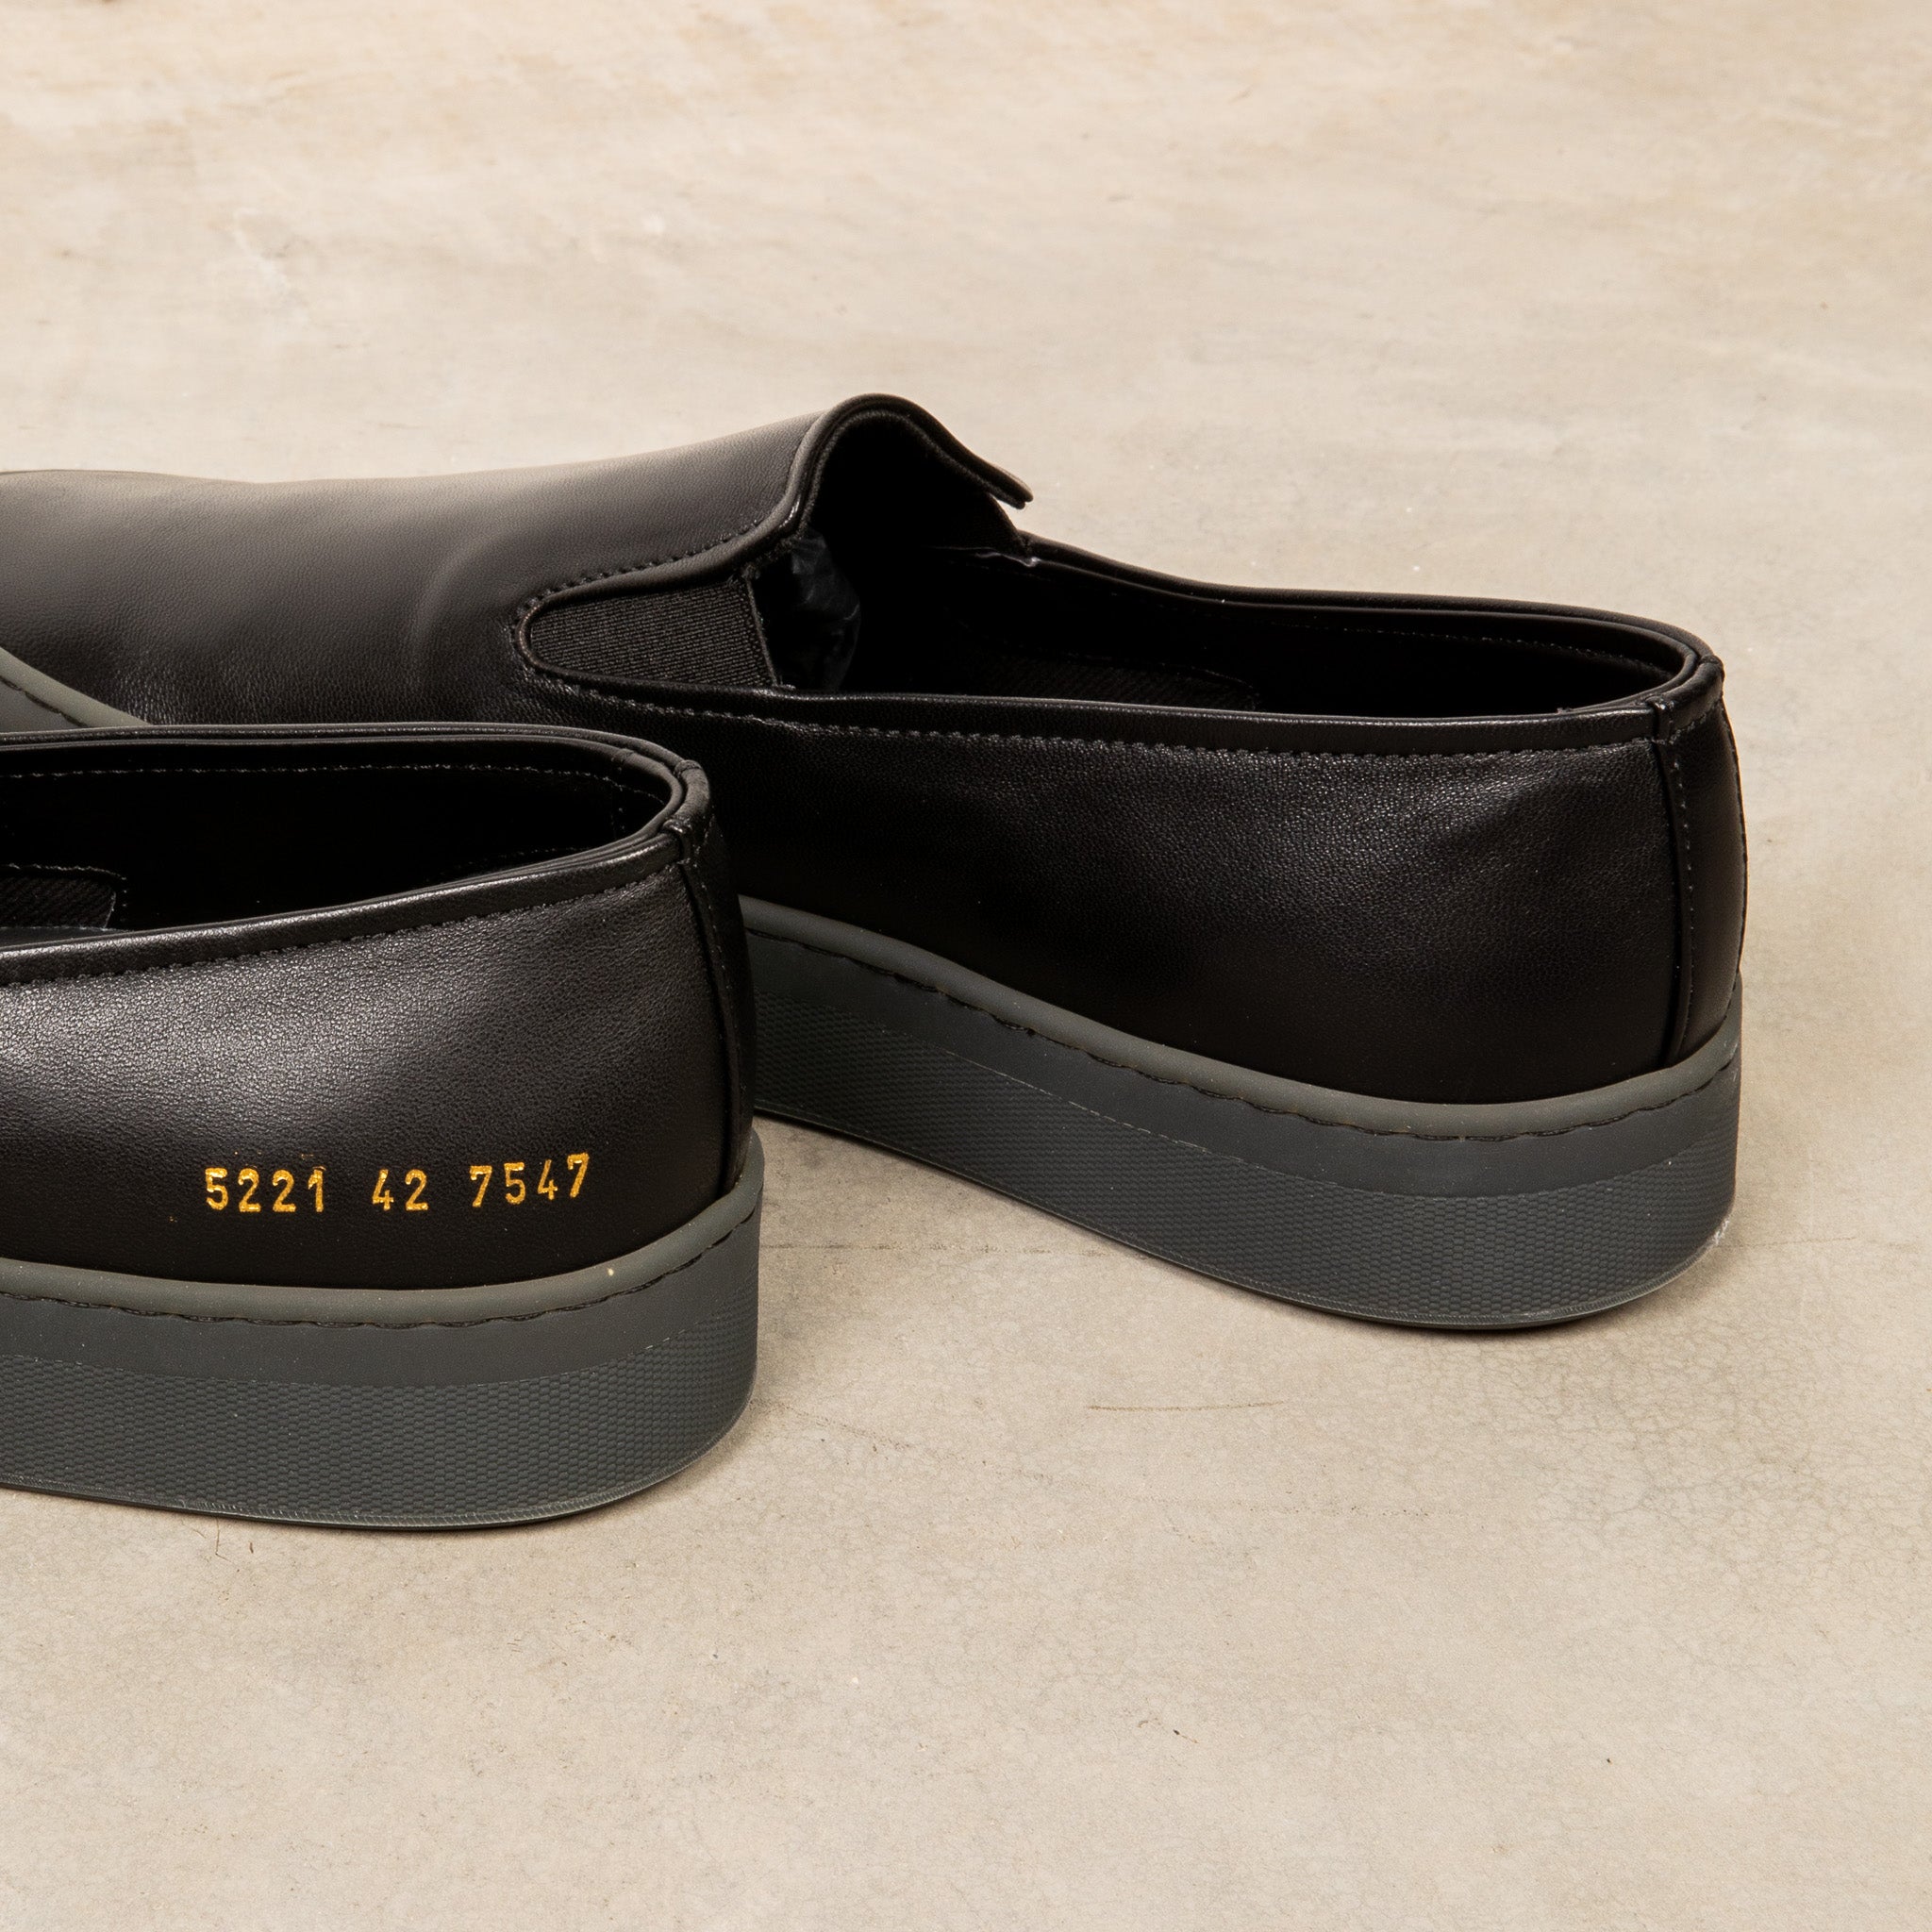 Common Projects Slip-on Black